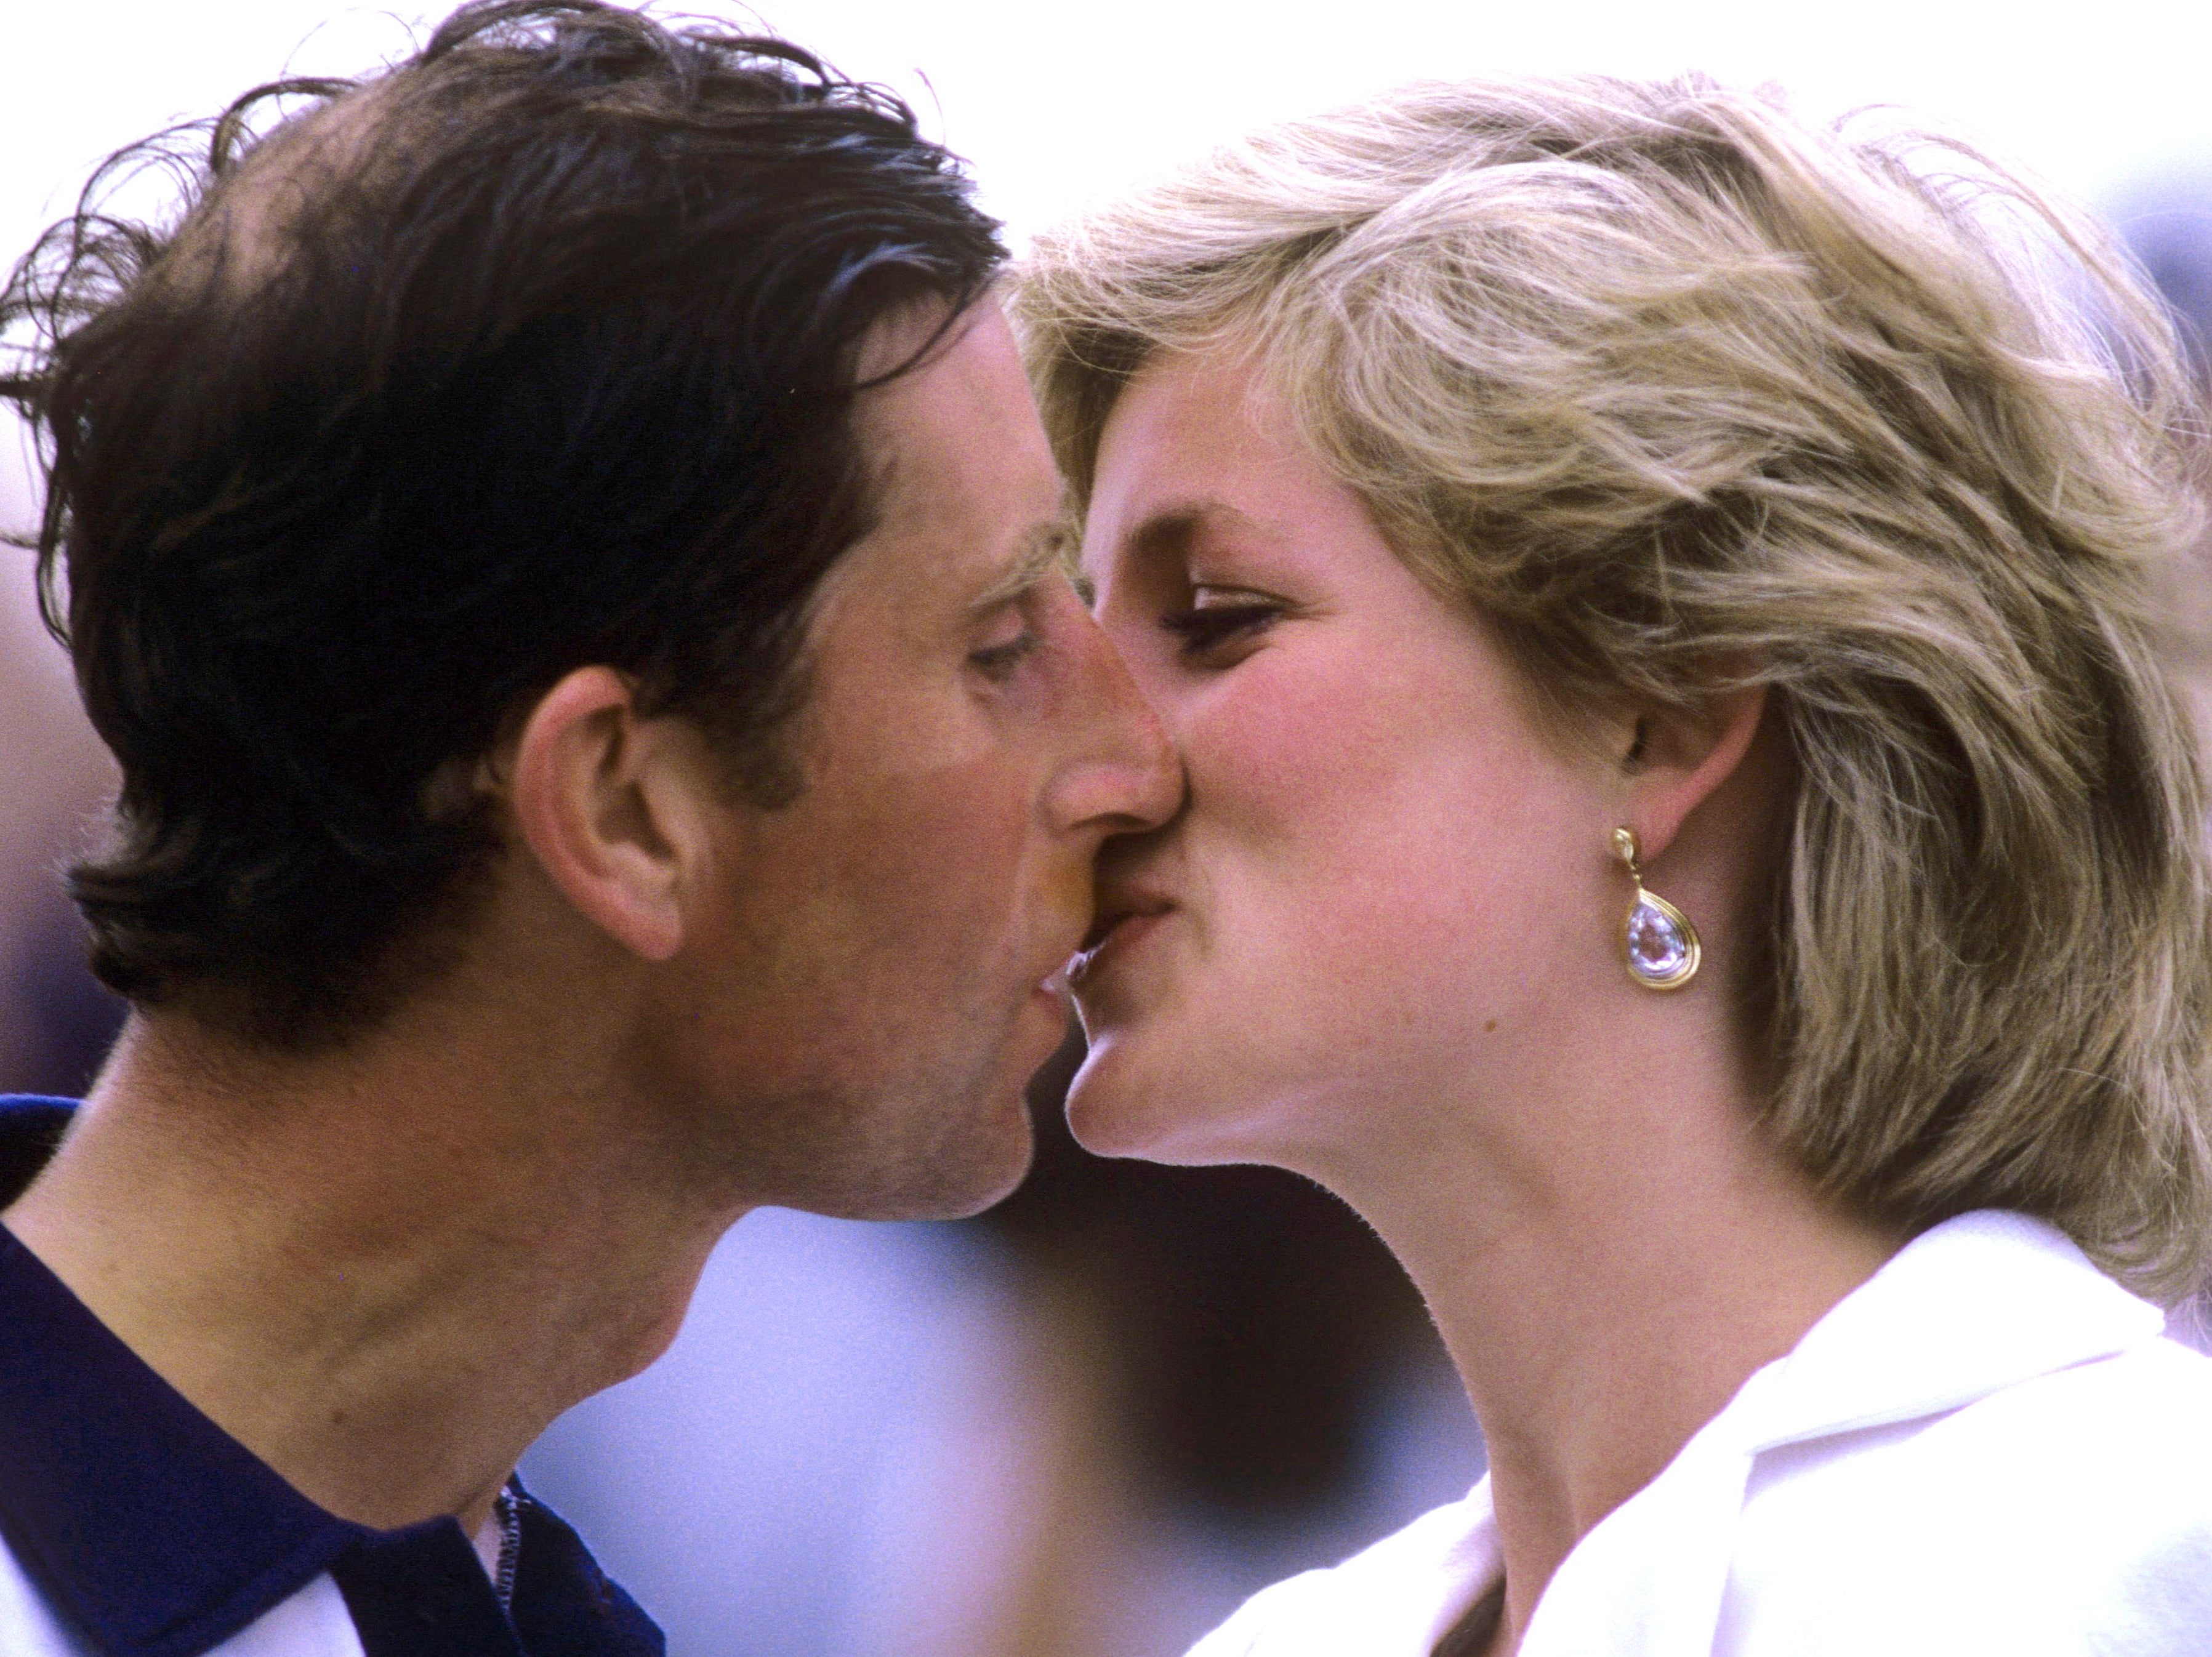 Diana cited her unhappy marriage with Prince Charles as a factor in developing bulimia